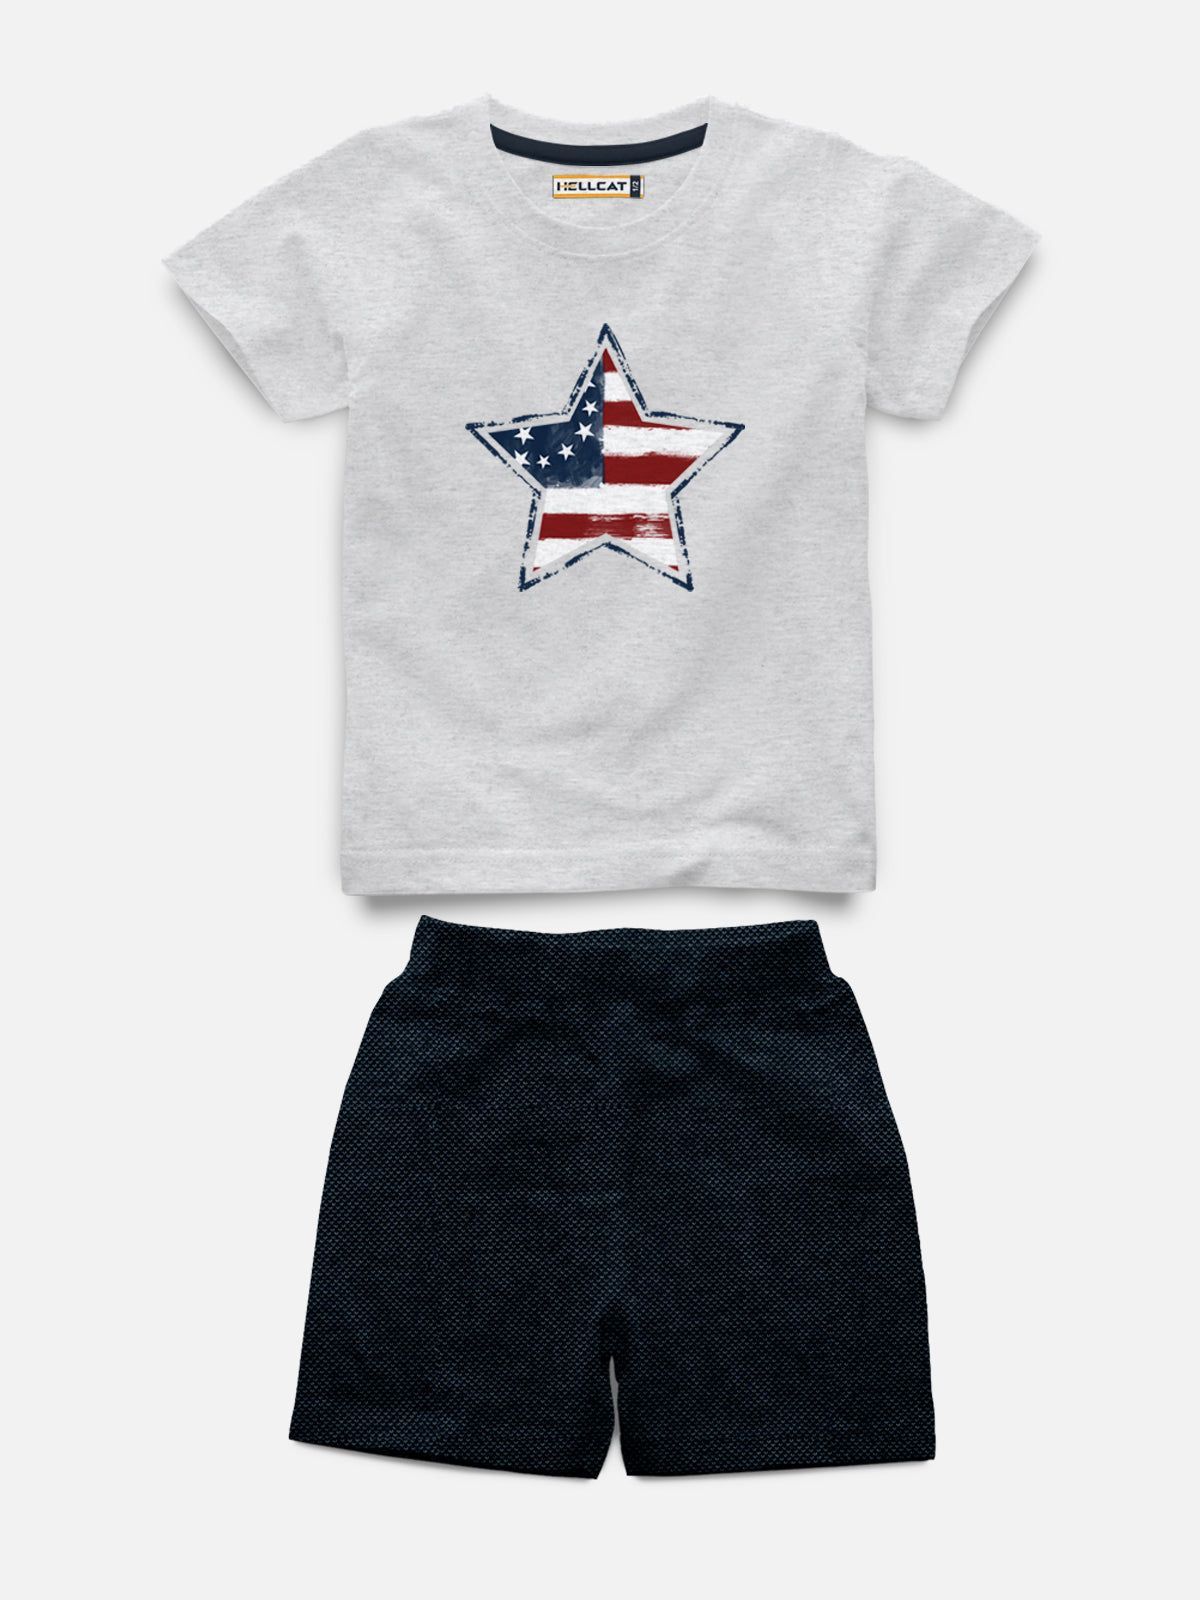 Half Sleeve Printed T-shirt with Comfy Solid Shorts for Infants & Girls - Pack of 2 (1 T-shirt & 1 short)